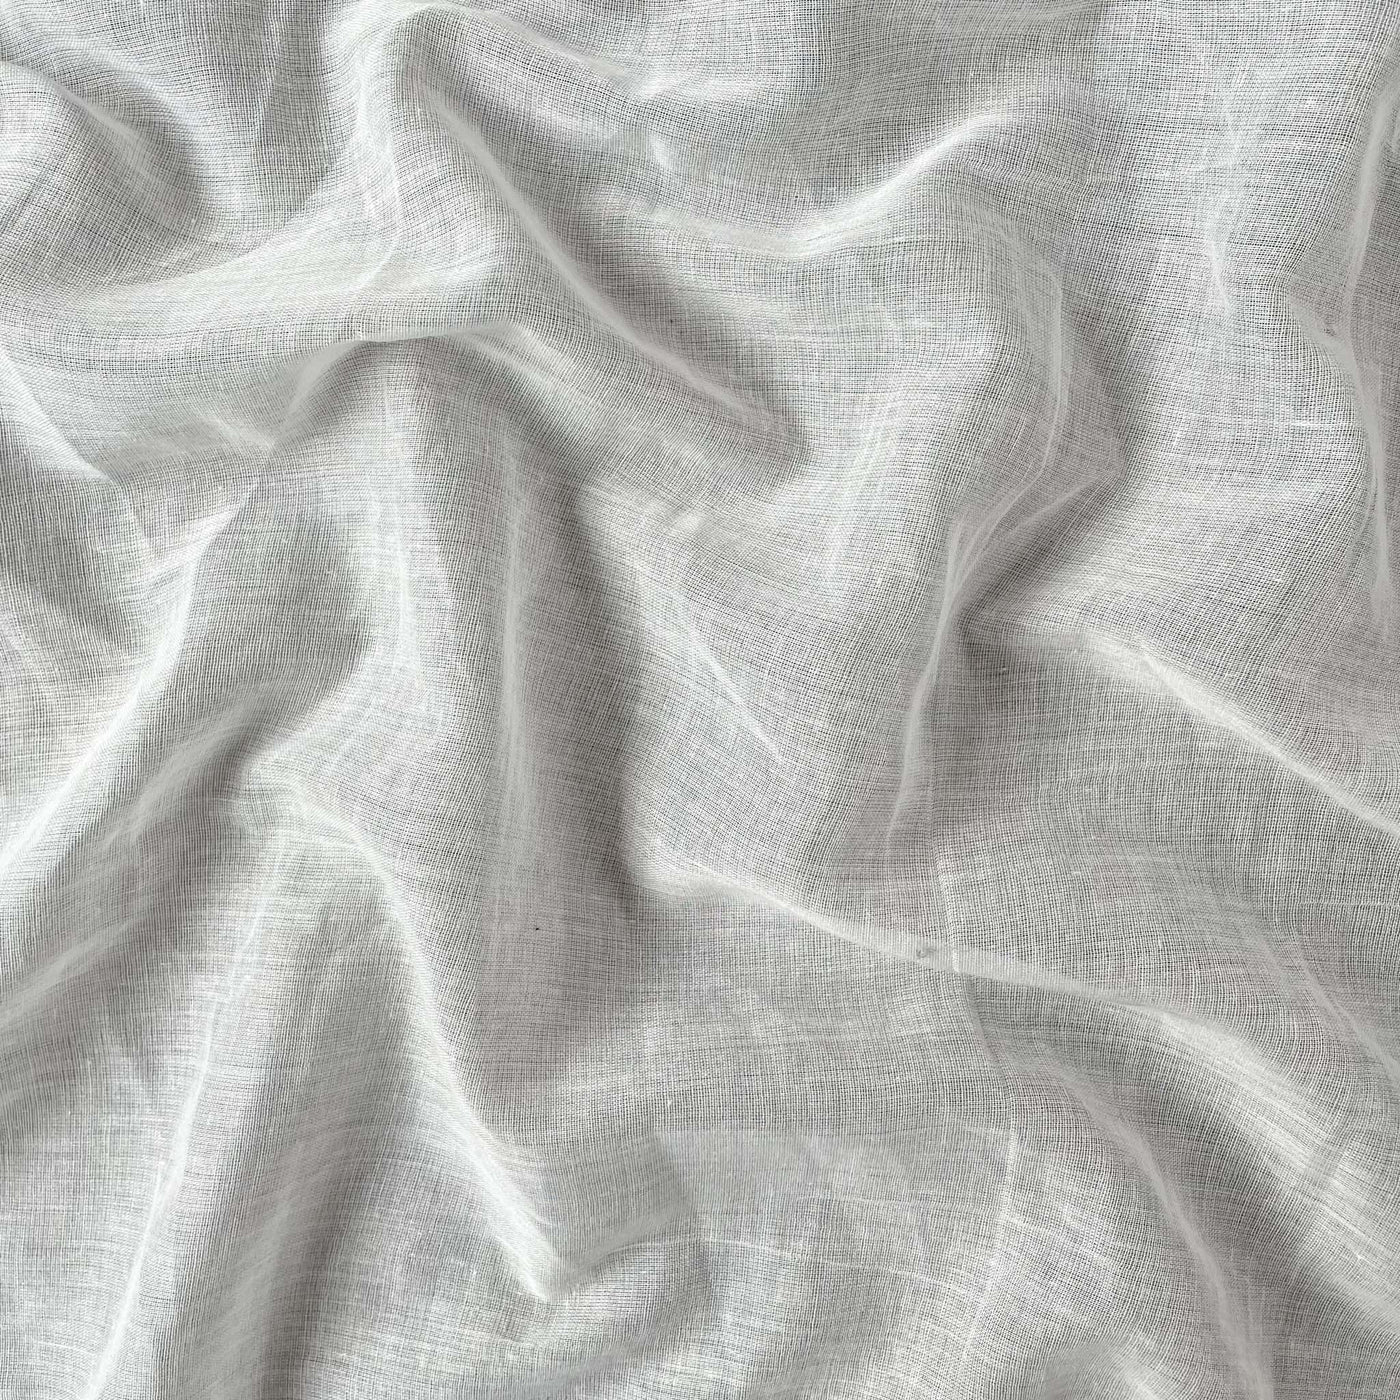 Dyeable Fabric Cut Piece (CUT PIECE) White Dyeable Pure Cotton Mul Plain Fabric (Width 42 Inches)